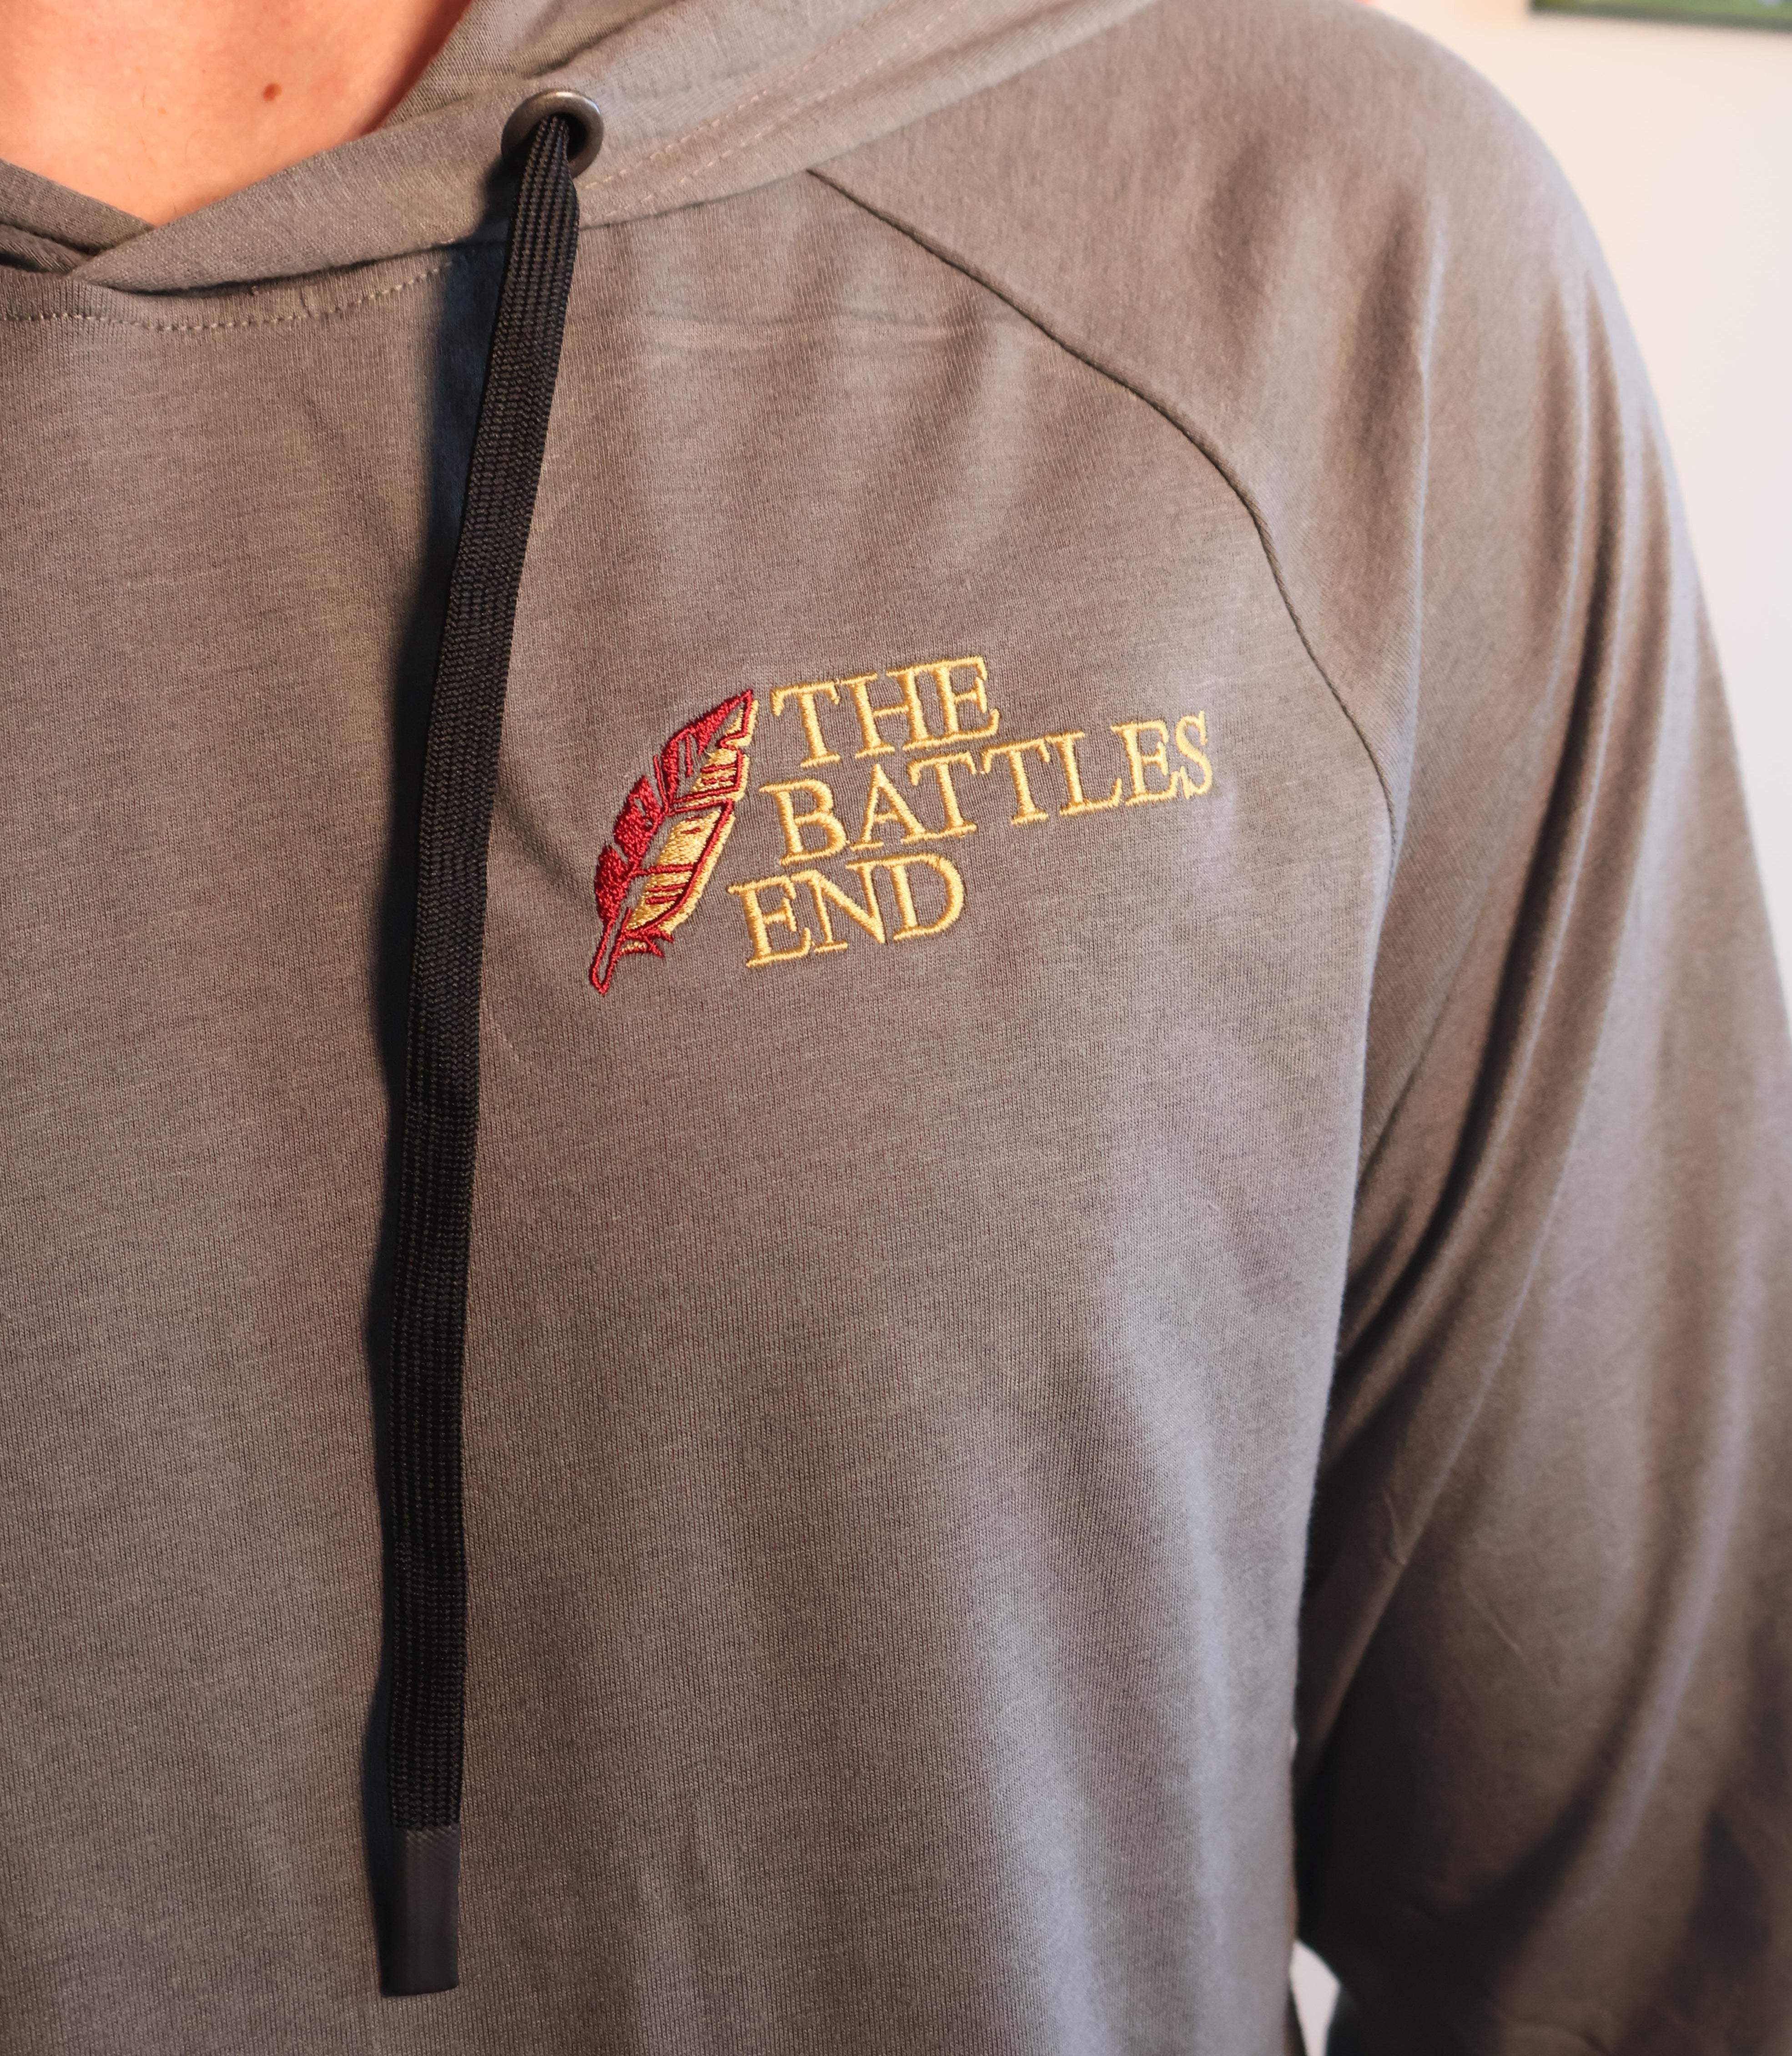 The Battle's End Performance T-Shirt Hoodie